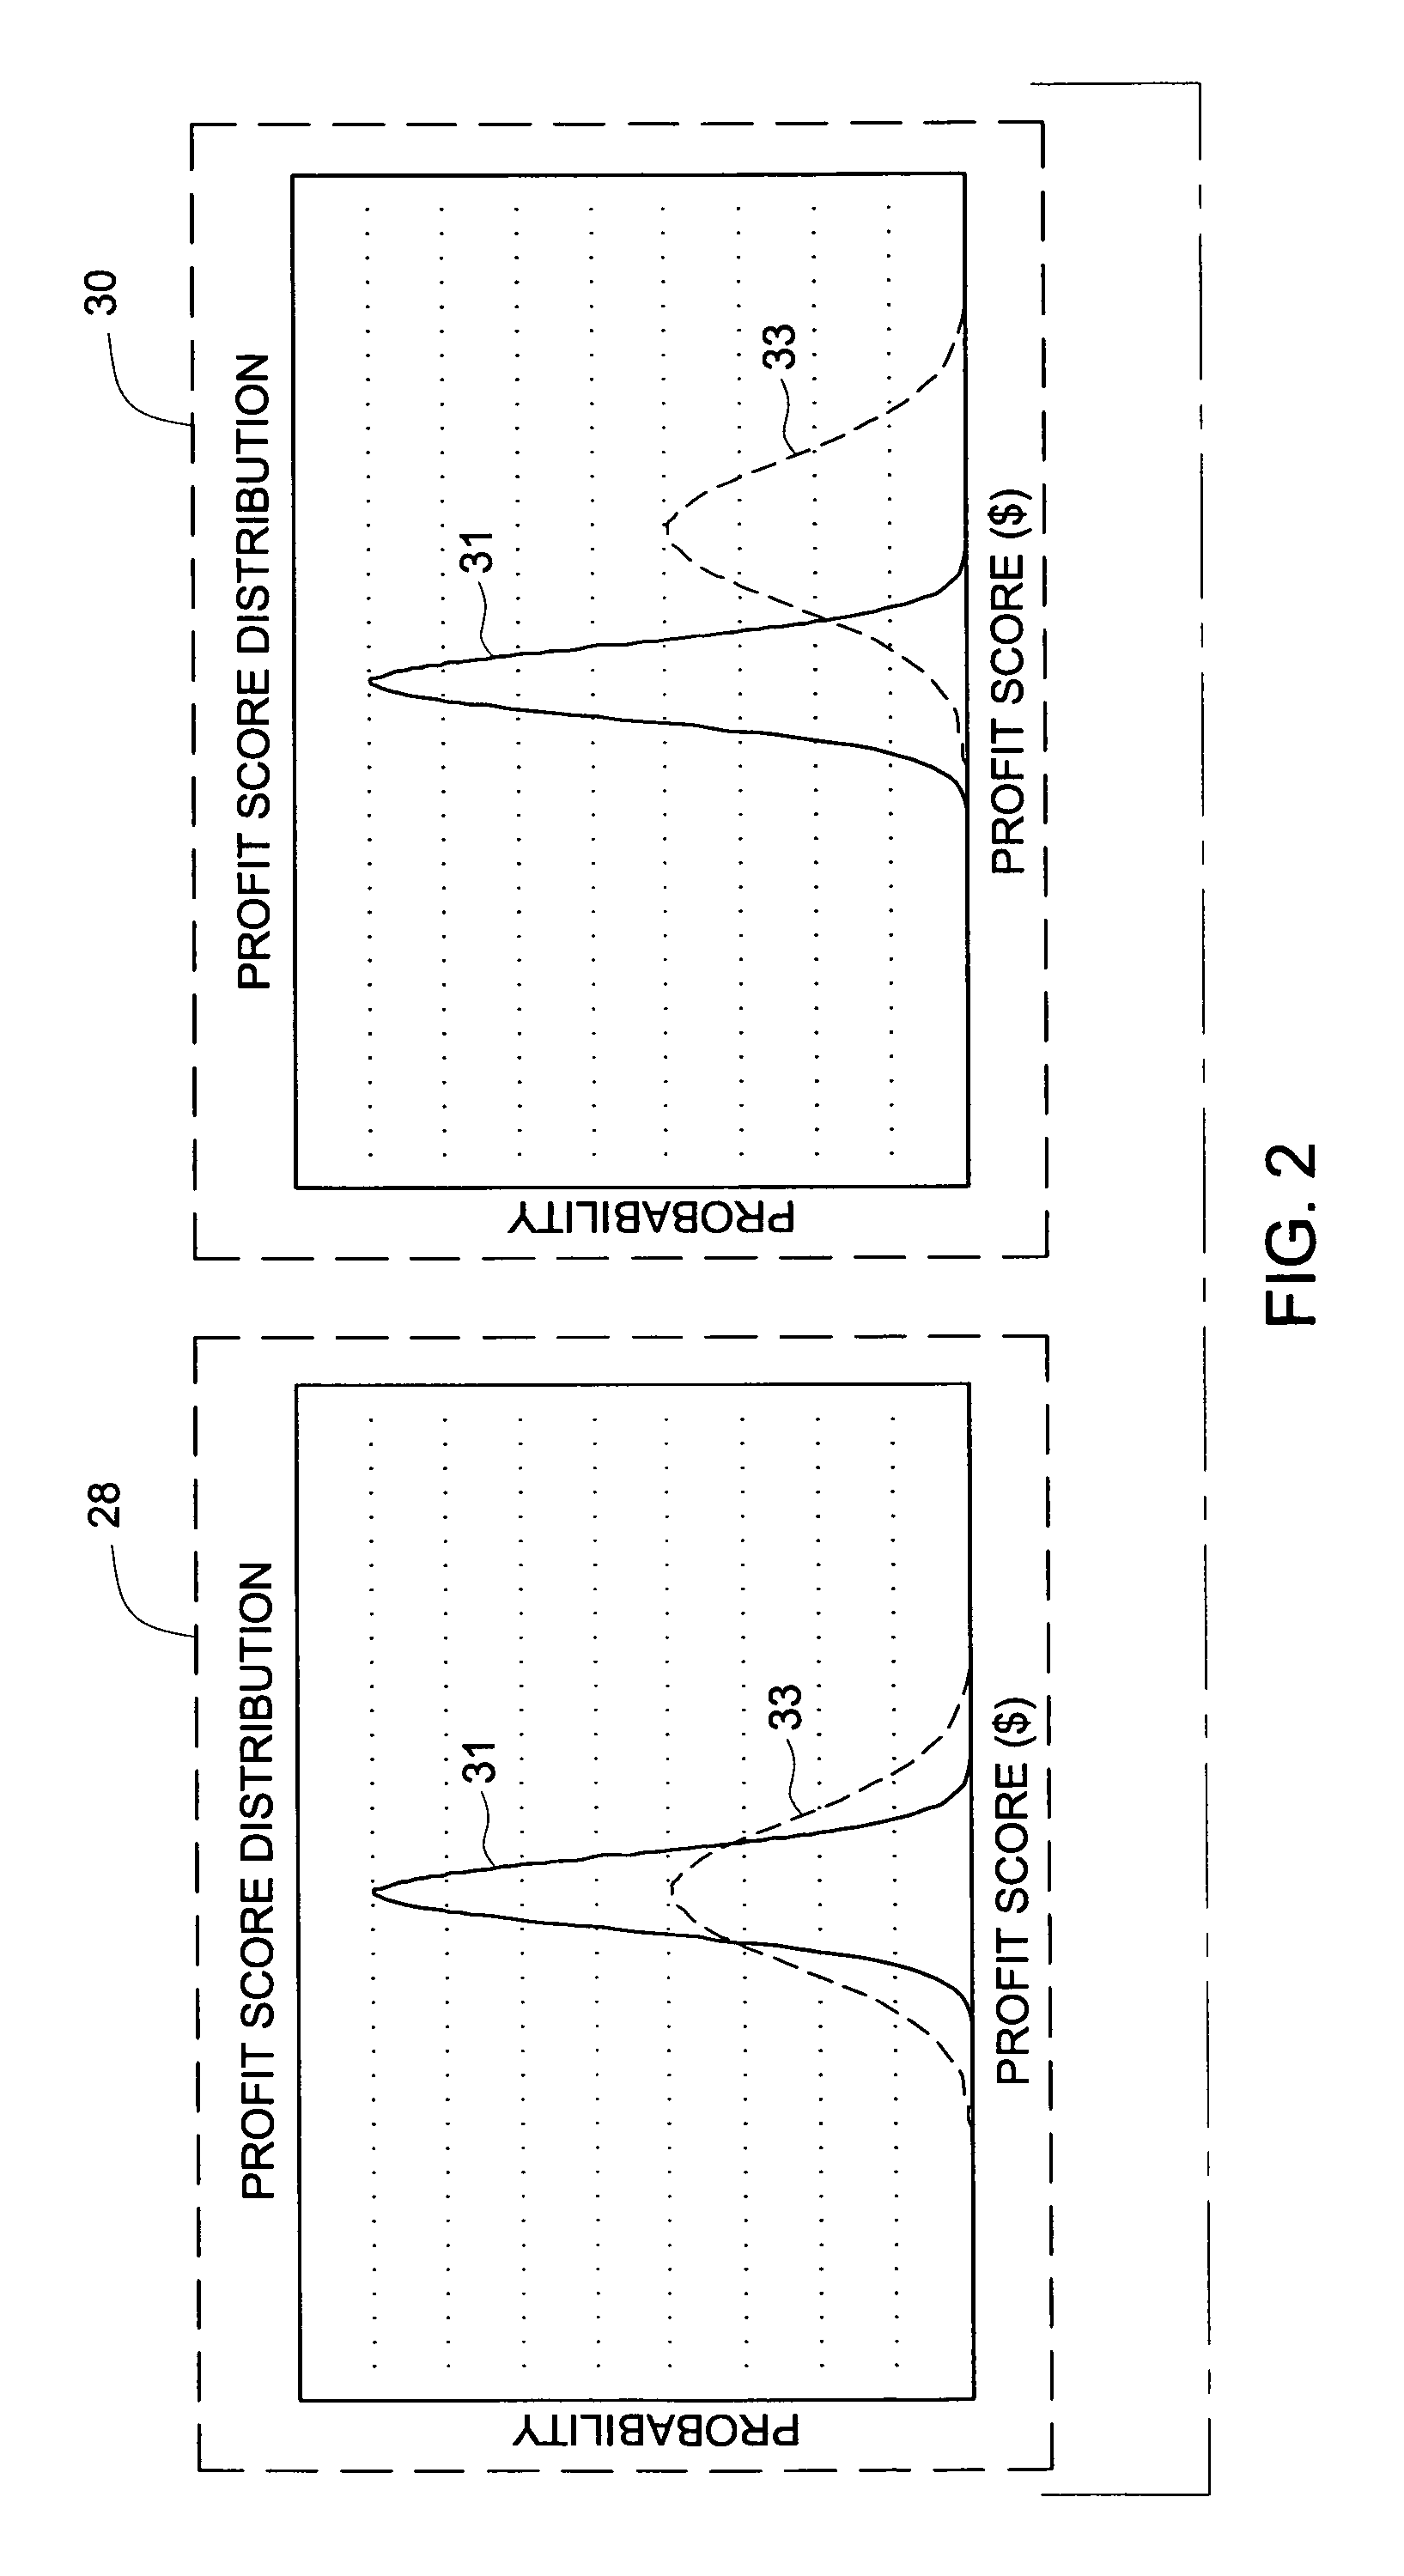 System and method for optimizing cross-sell decisions for financial products